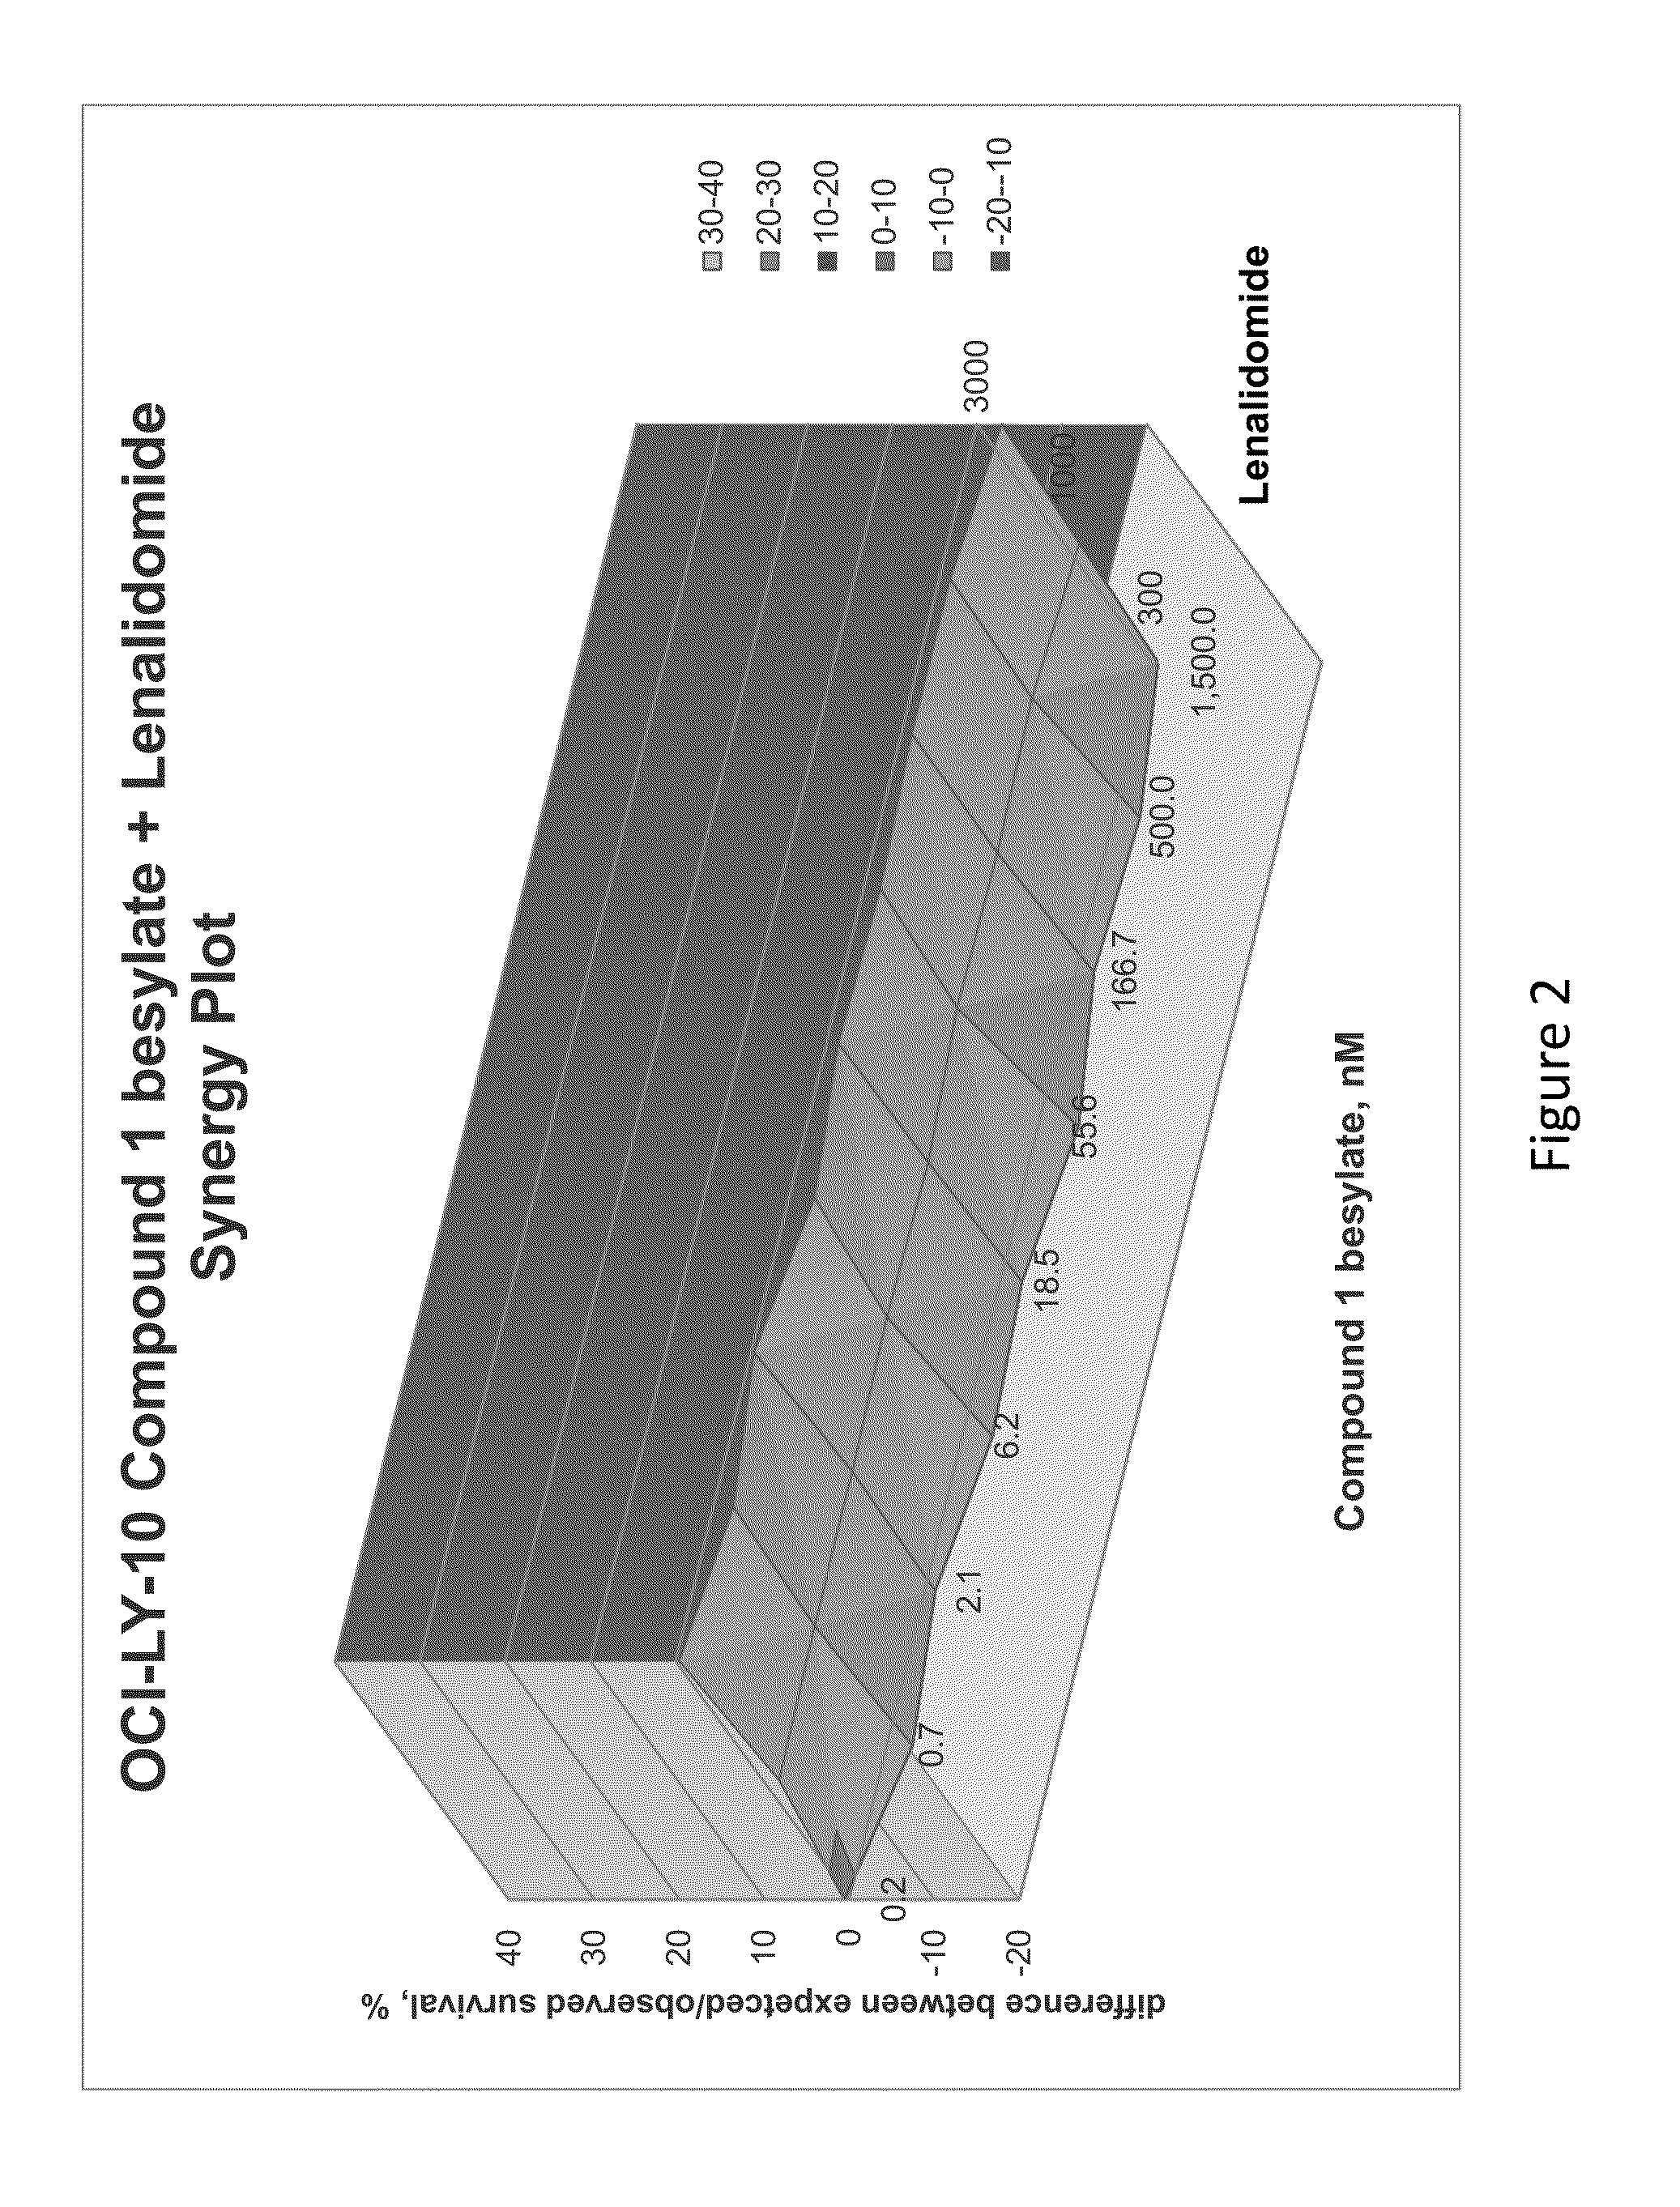 Methods of treating a disease or disorder associated with bruton's tyrosine kinase